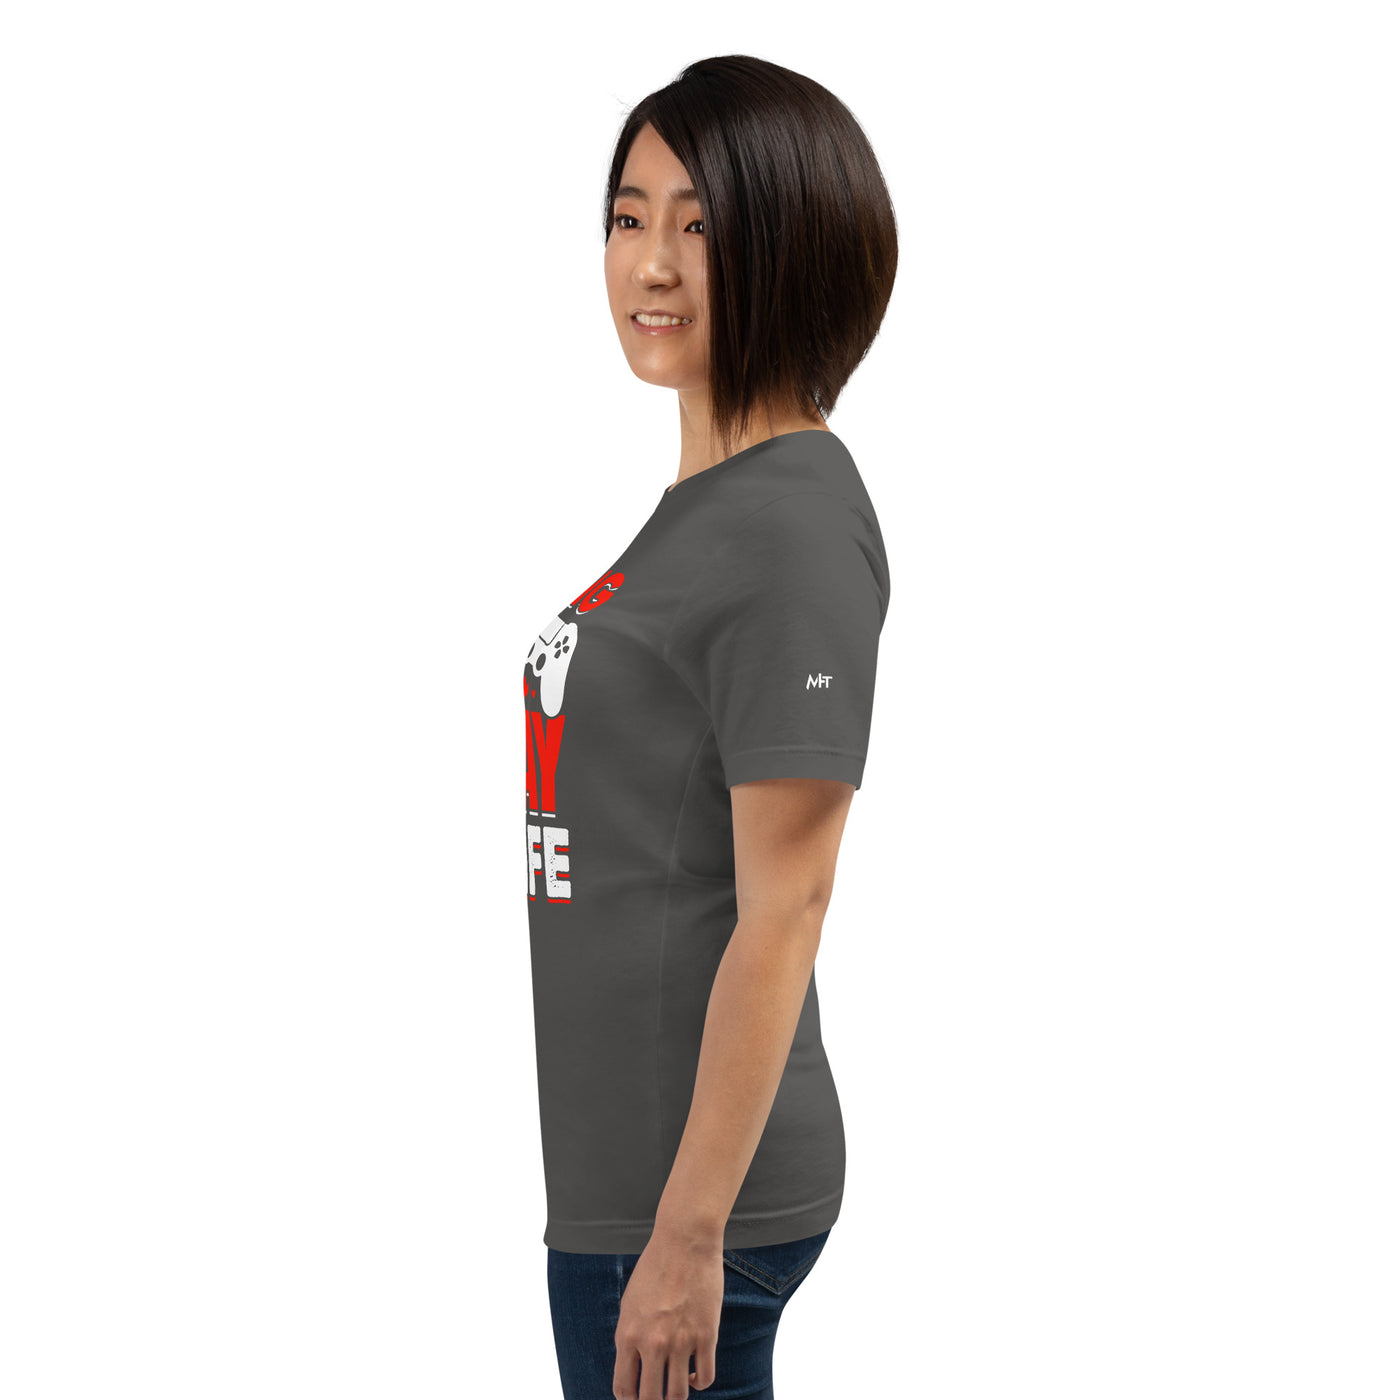 Gaming is way of life Unisex t-shirt